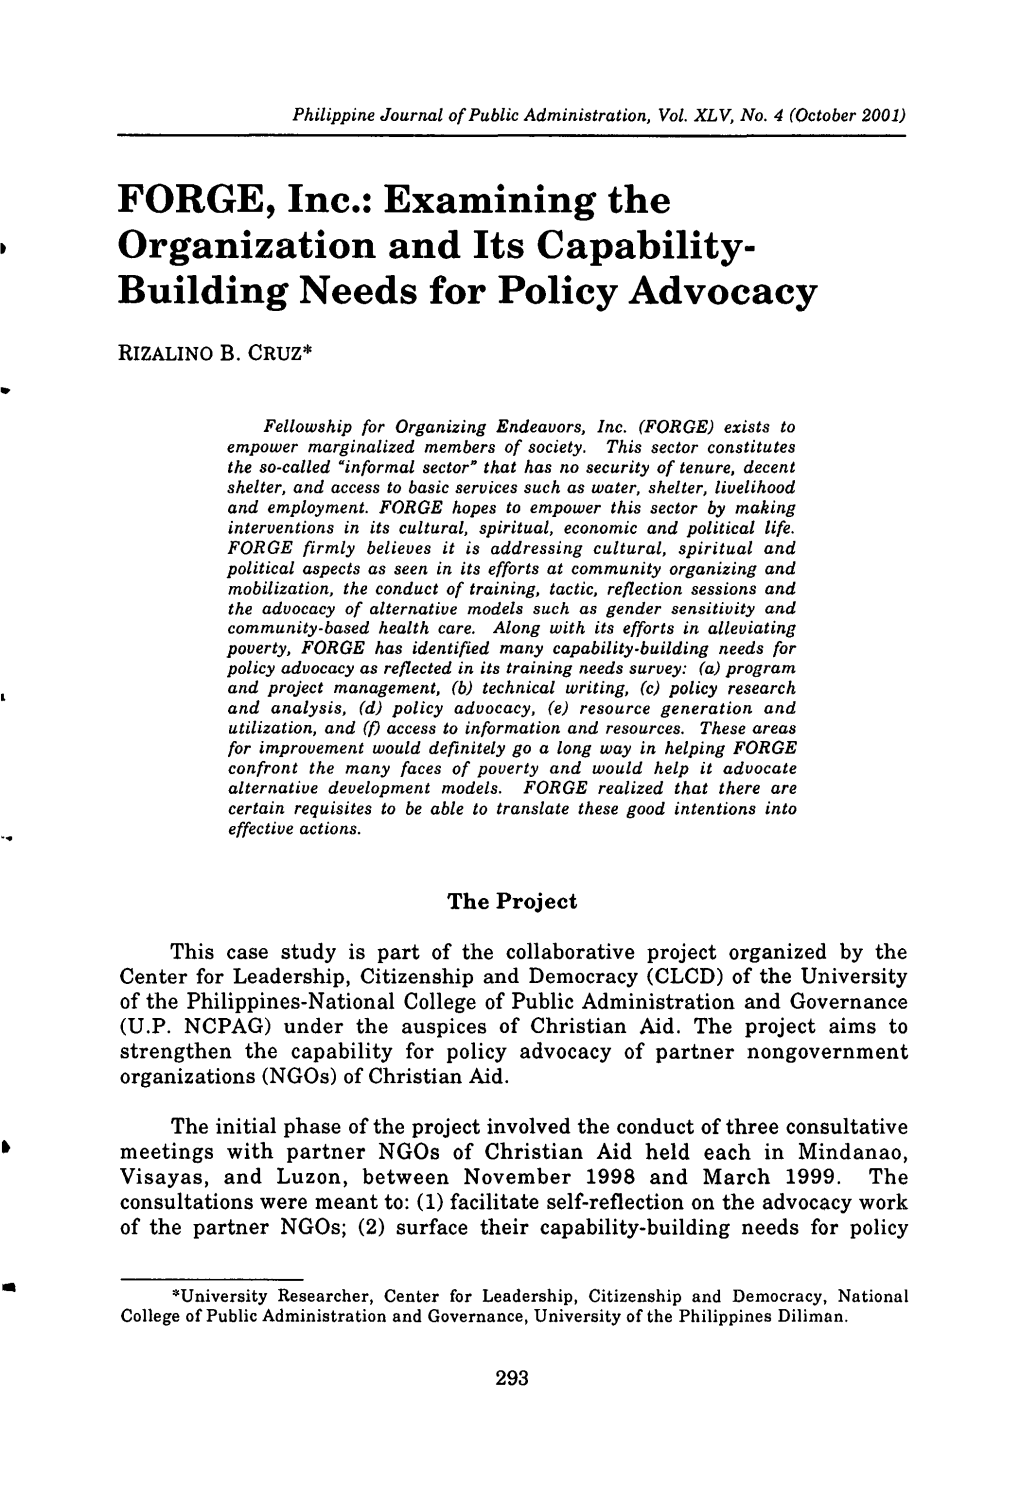 FORGE, Inc.: Examining the Organization and Its Capability- Building Needs for Policy Advocacy